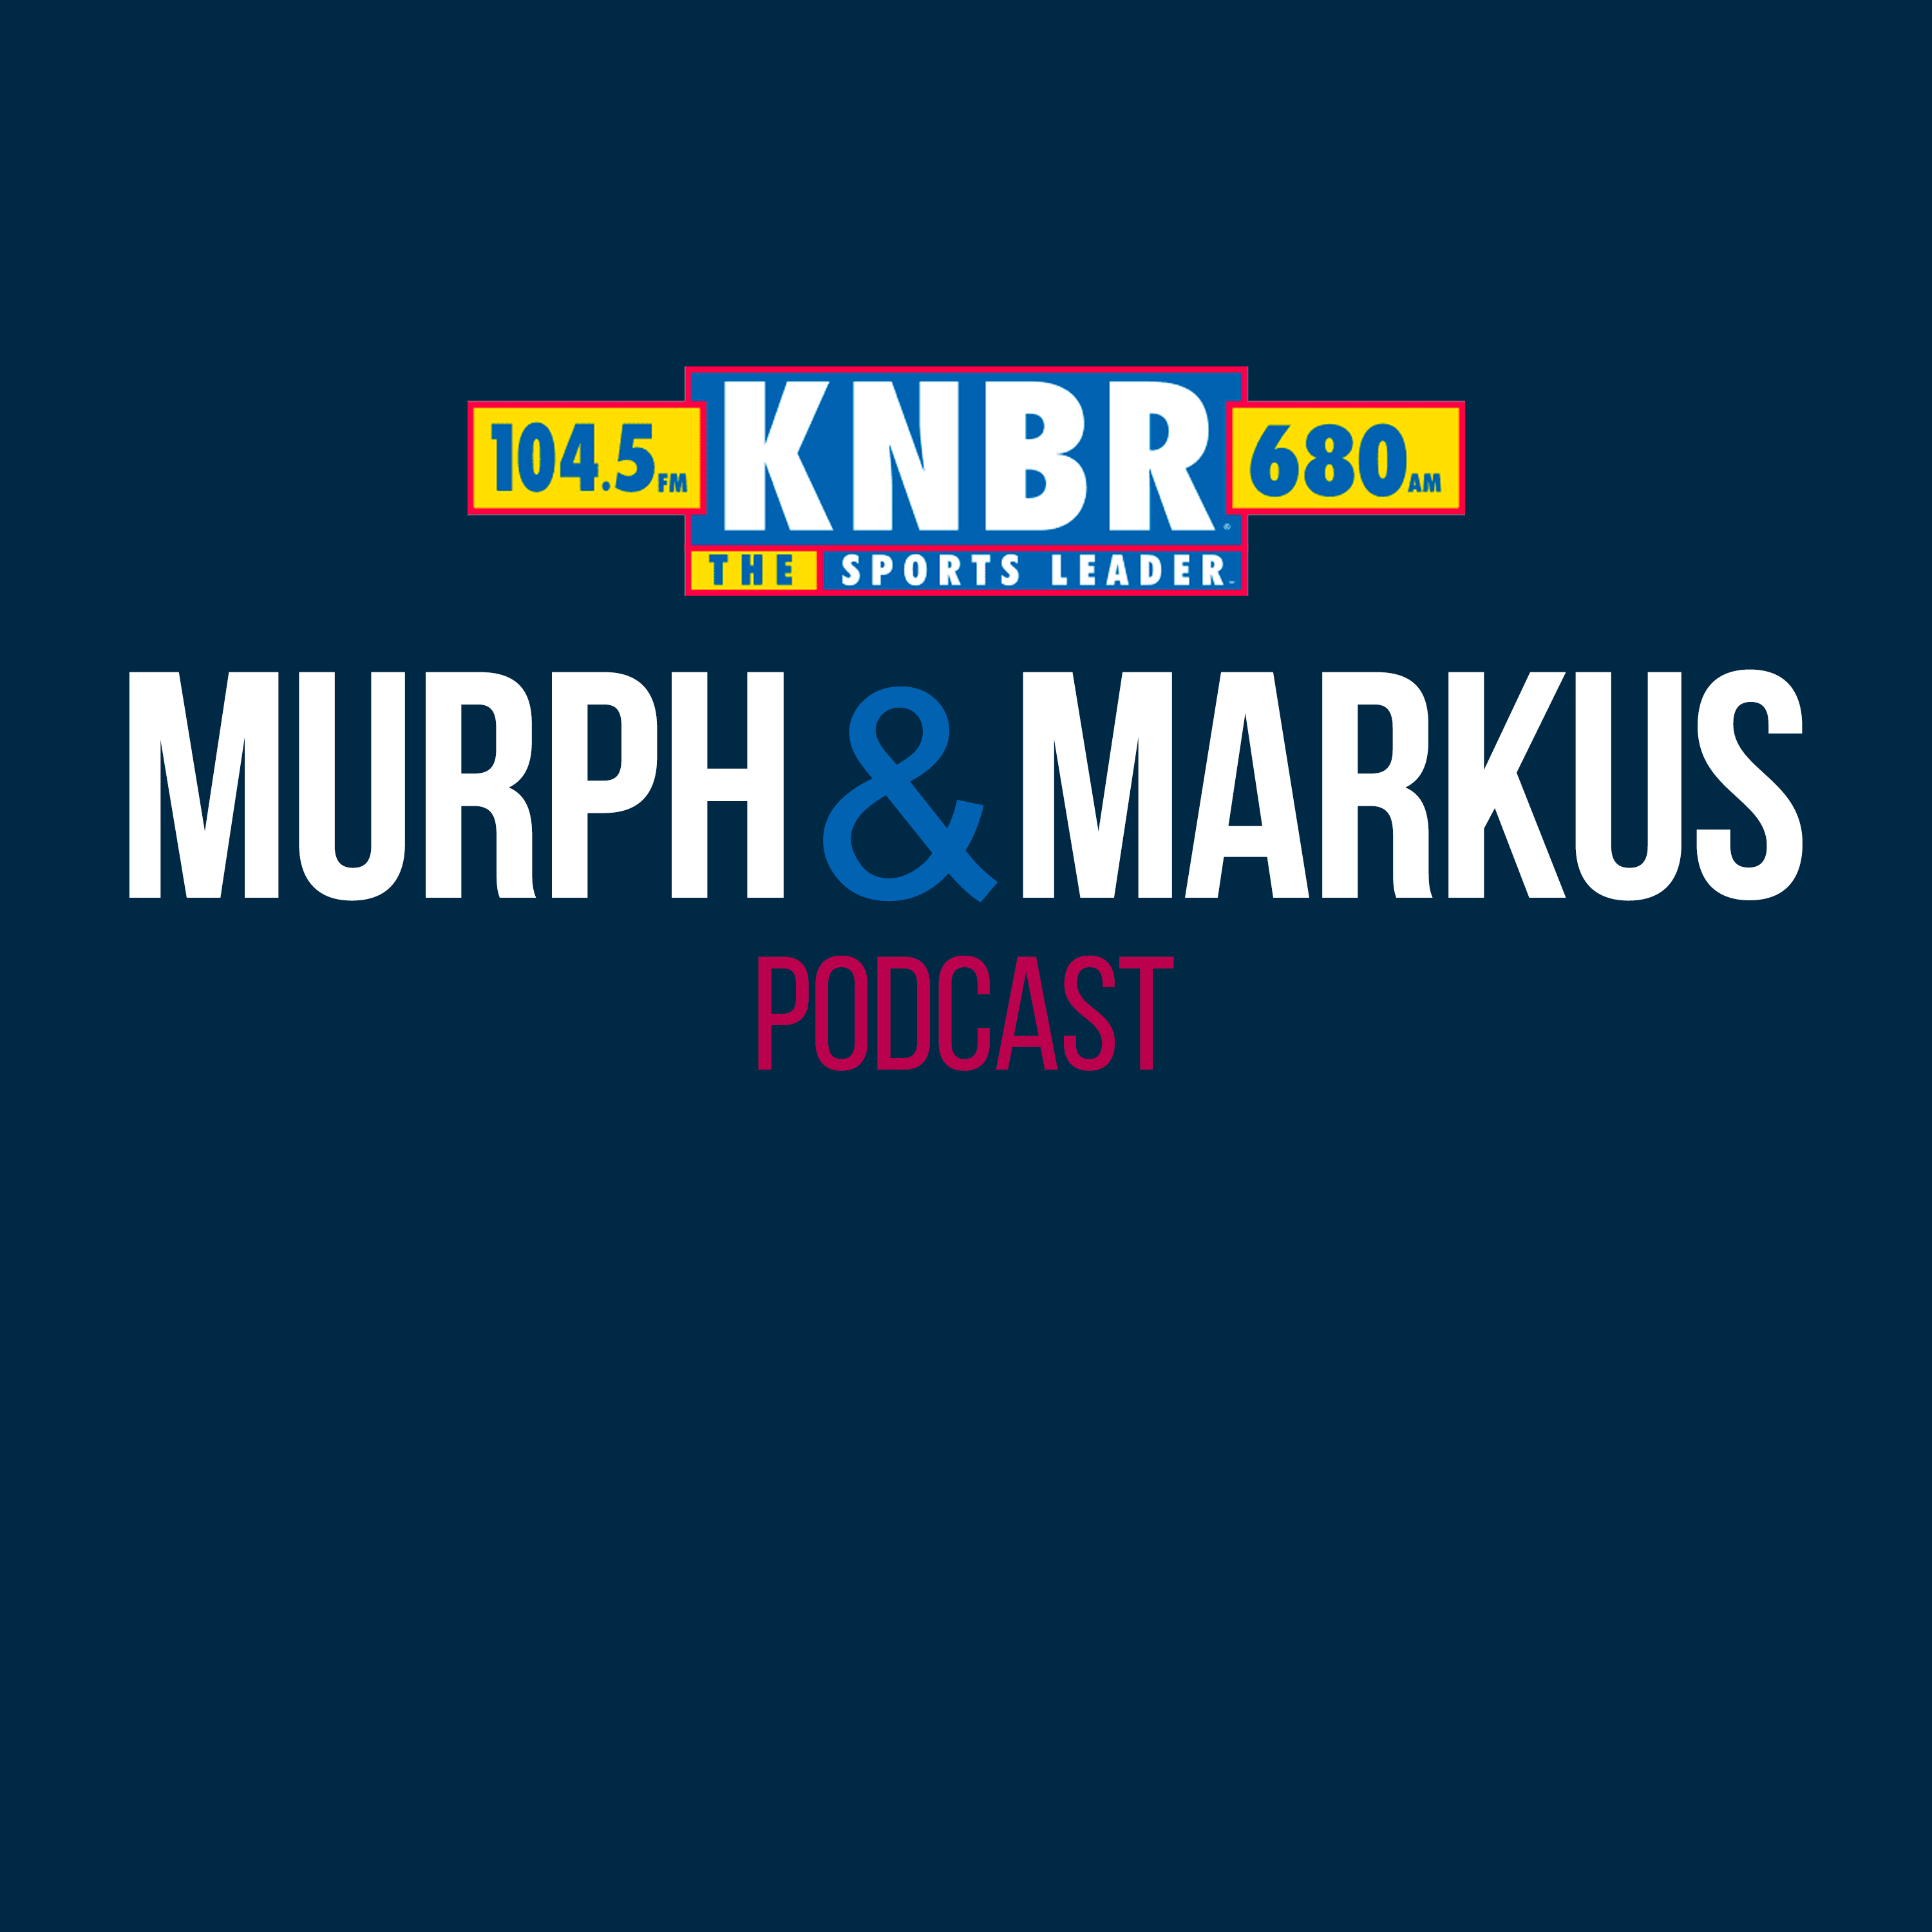 7-3 Hour 2: Murph & Markus react to some news about Klay playing golf with Joe Lacob about six weeks ago, talk to Mike Krukow, and get into today's top story in the Big Hit